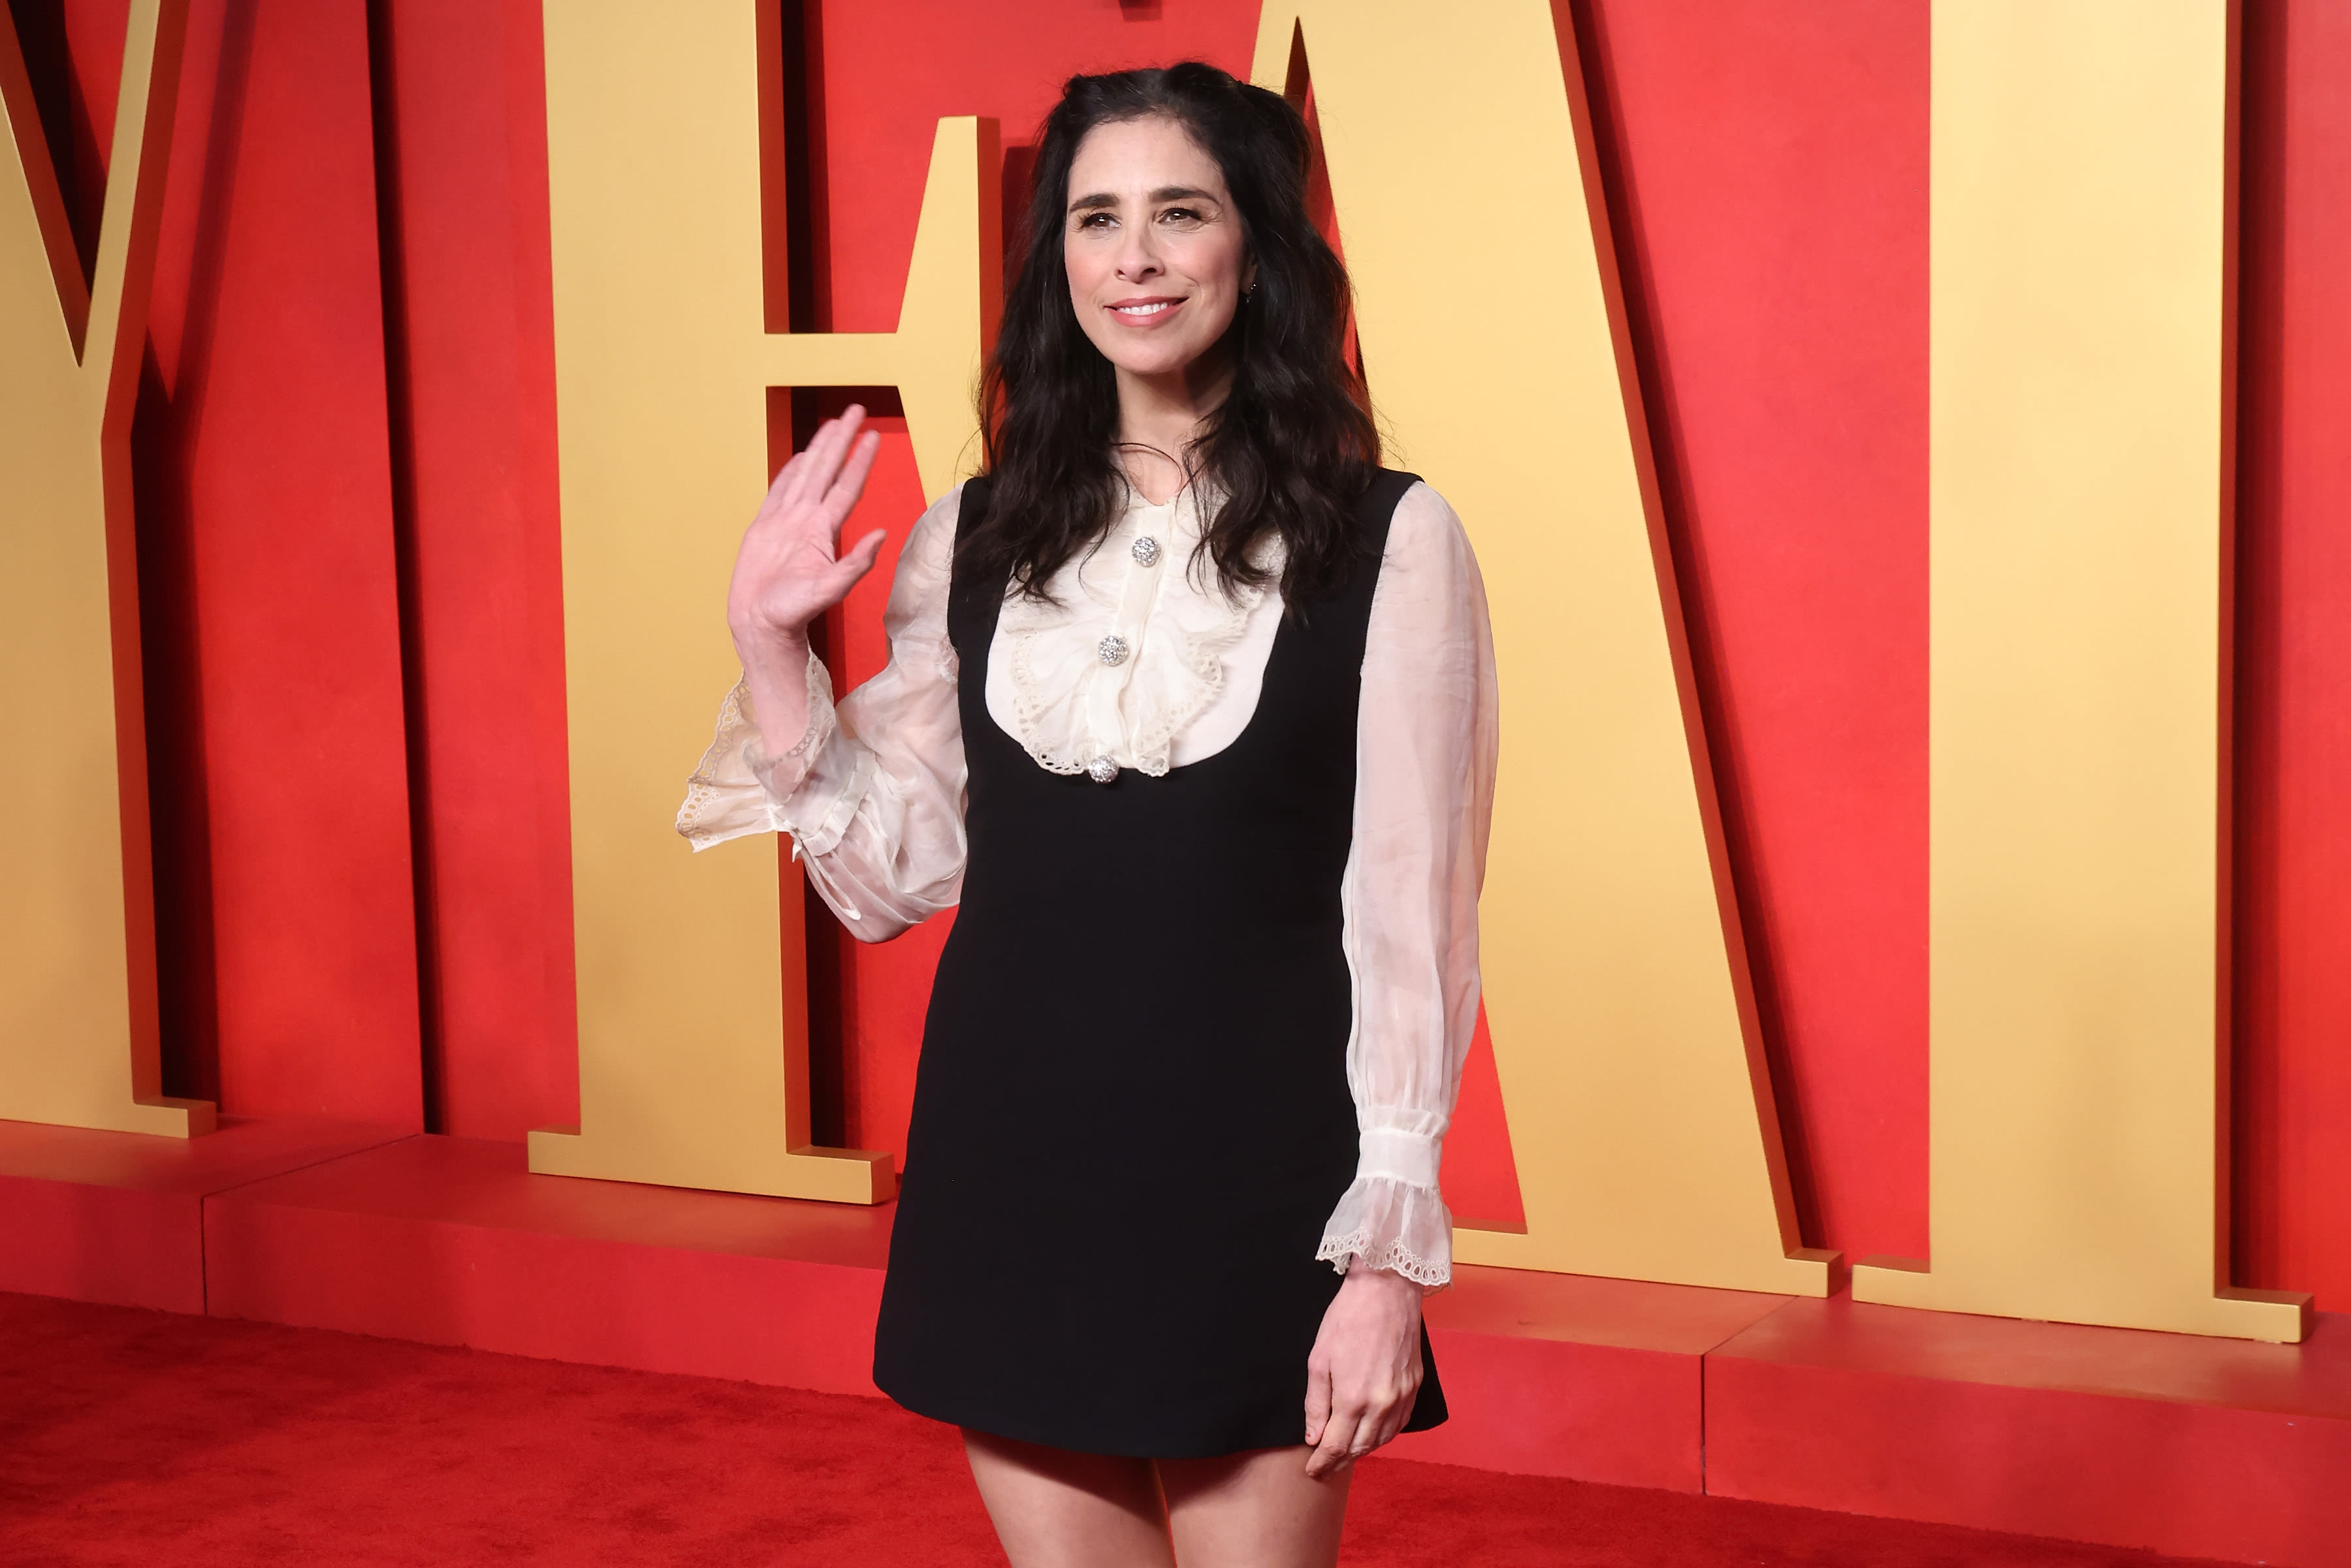 Sarah Silverman Retired Her Formative ‘Arrogant Ignorant’ Character After Trump Rise